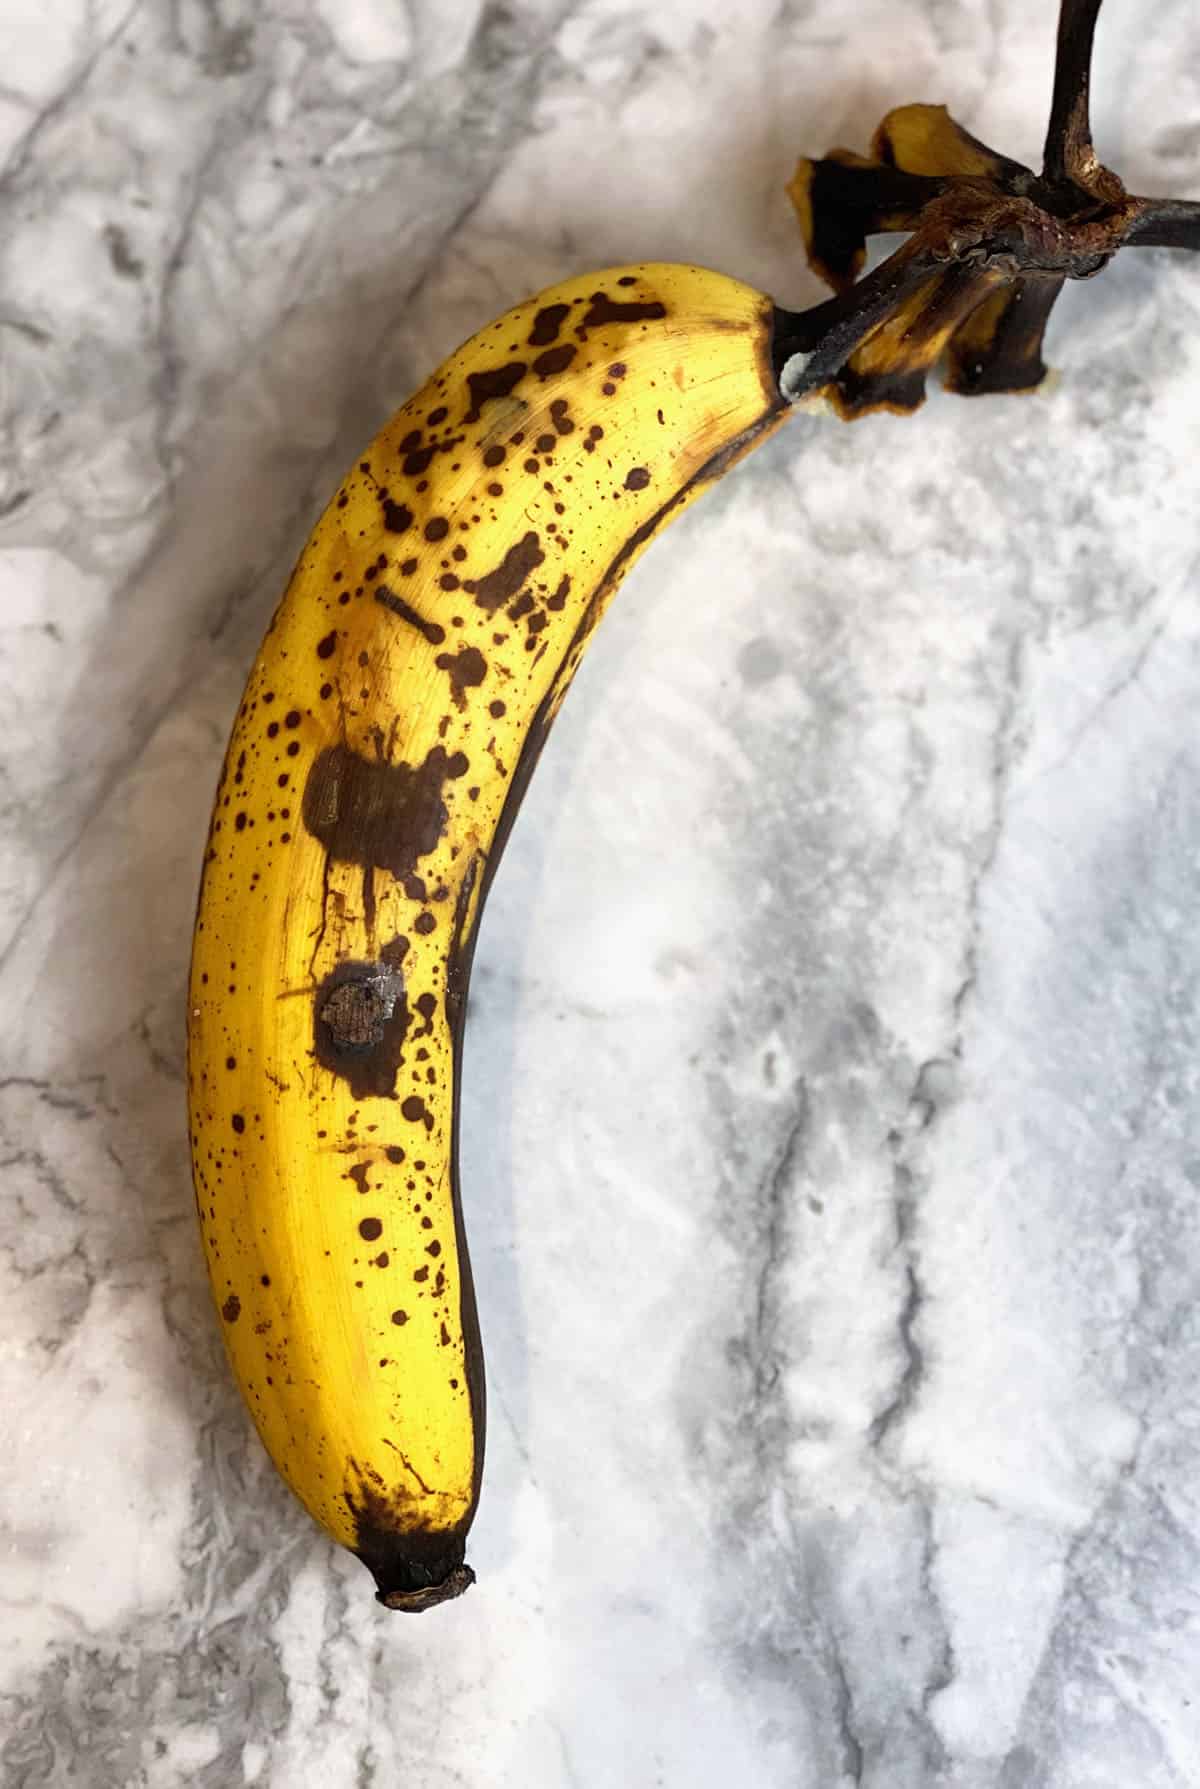 A very ripe banana is presented on a marble surface.